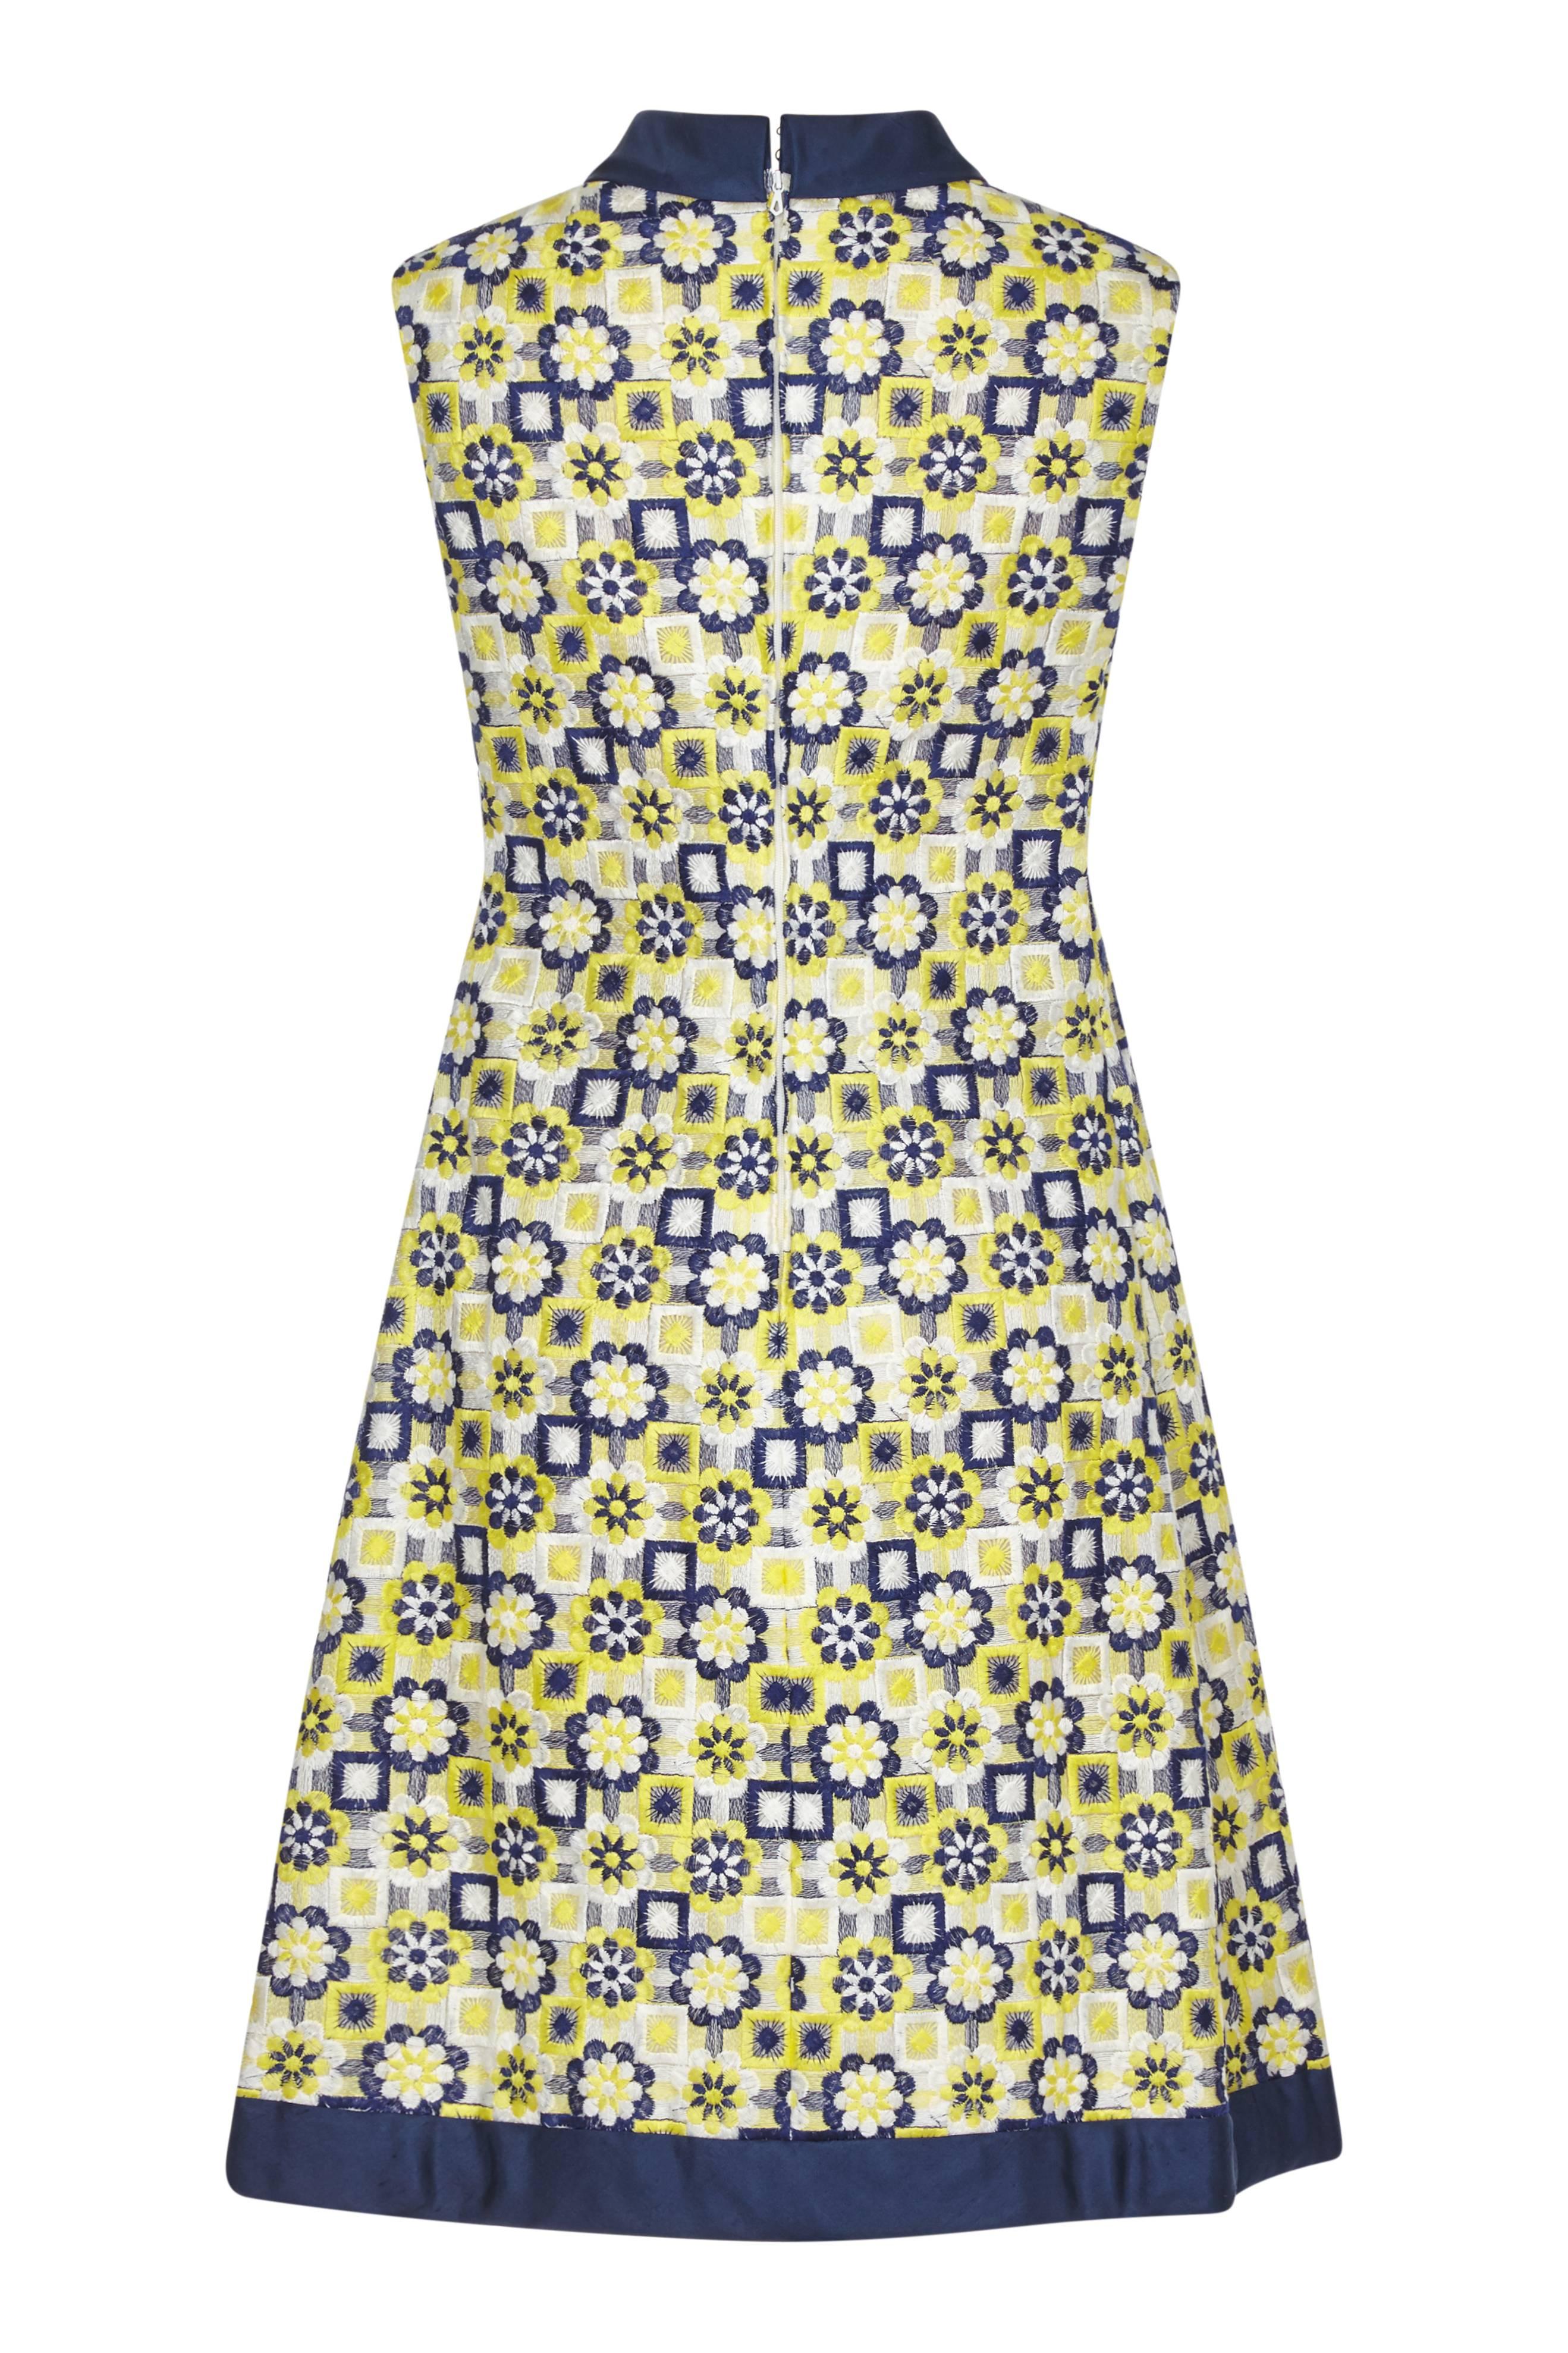 This unique 1960s Blue and Yellow embroidered shift dress has plenty of character and is a charming example of 1960s modernity. The machine embroidered cotton overlay is a flattering combination of floral and geometric design, in cheerful yellow,